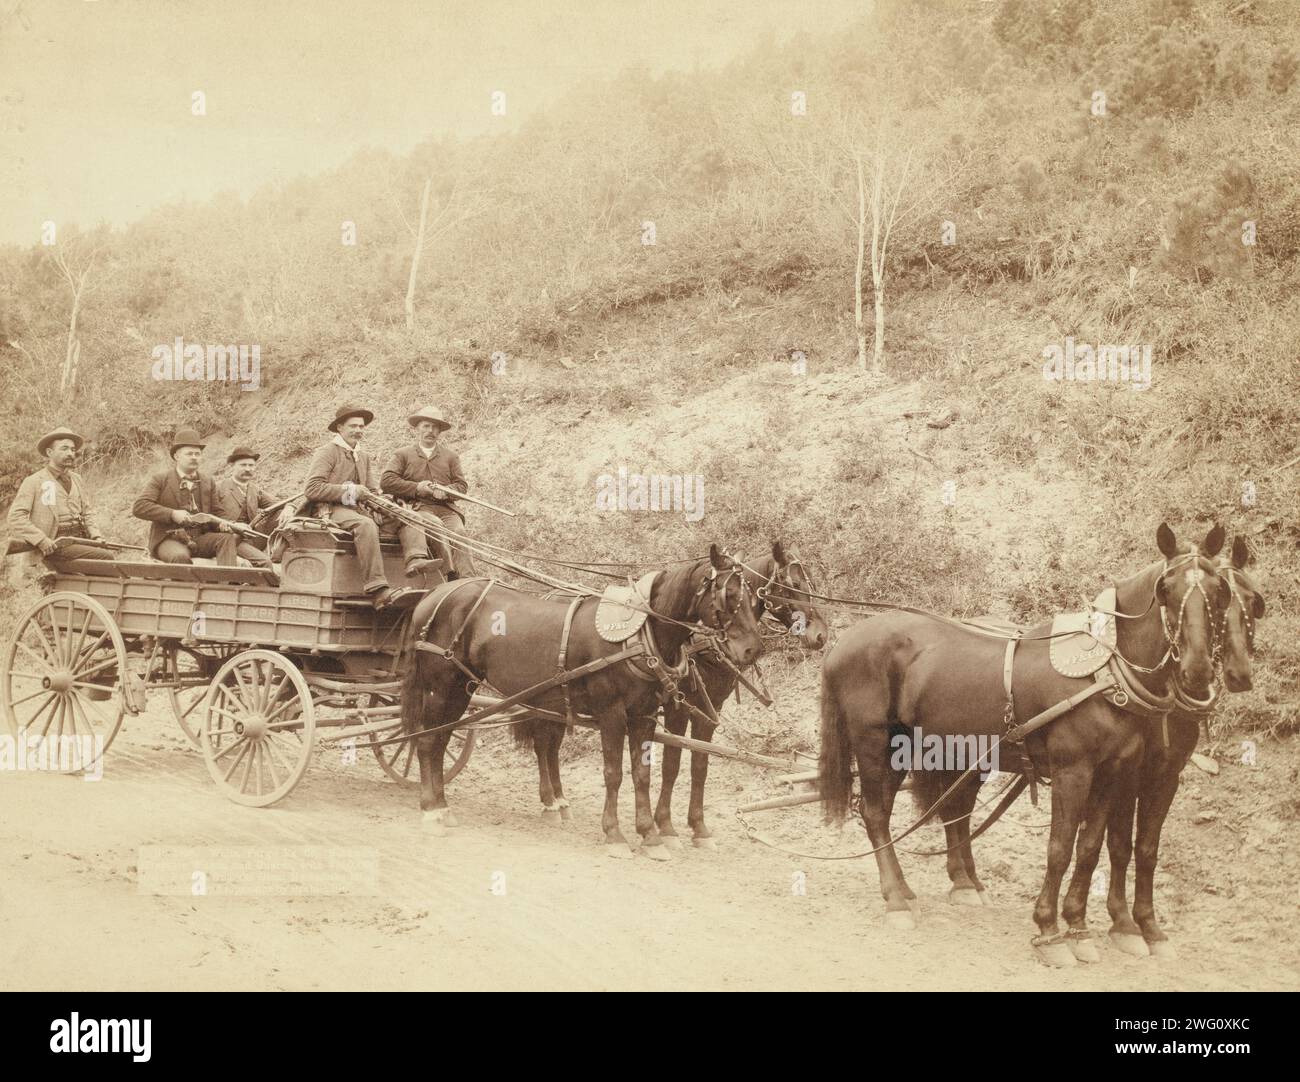 Wells Fargo Express Co. Deadwood Treasure Wagon and Guards with $250,000 gold bullion from the Great Homestake Mine, Deadwood, S.D., 1890 []. Five men, holding rifles, in a horse-drawn, uncovered wagon on a country road. Stock Photo